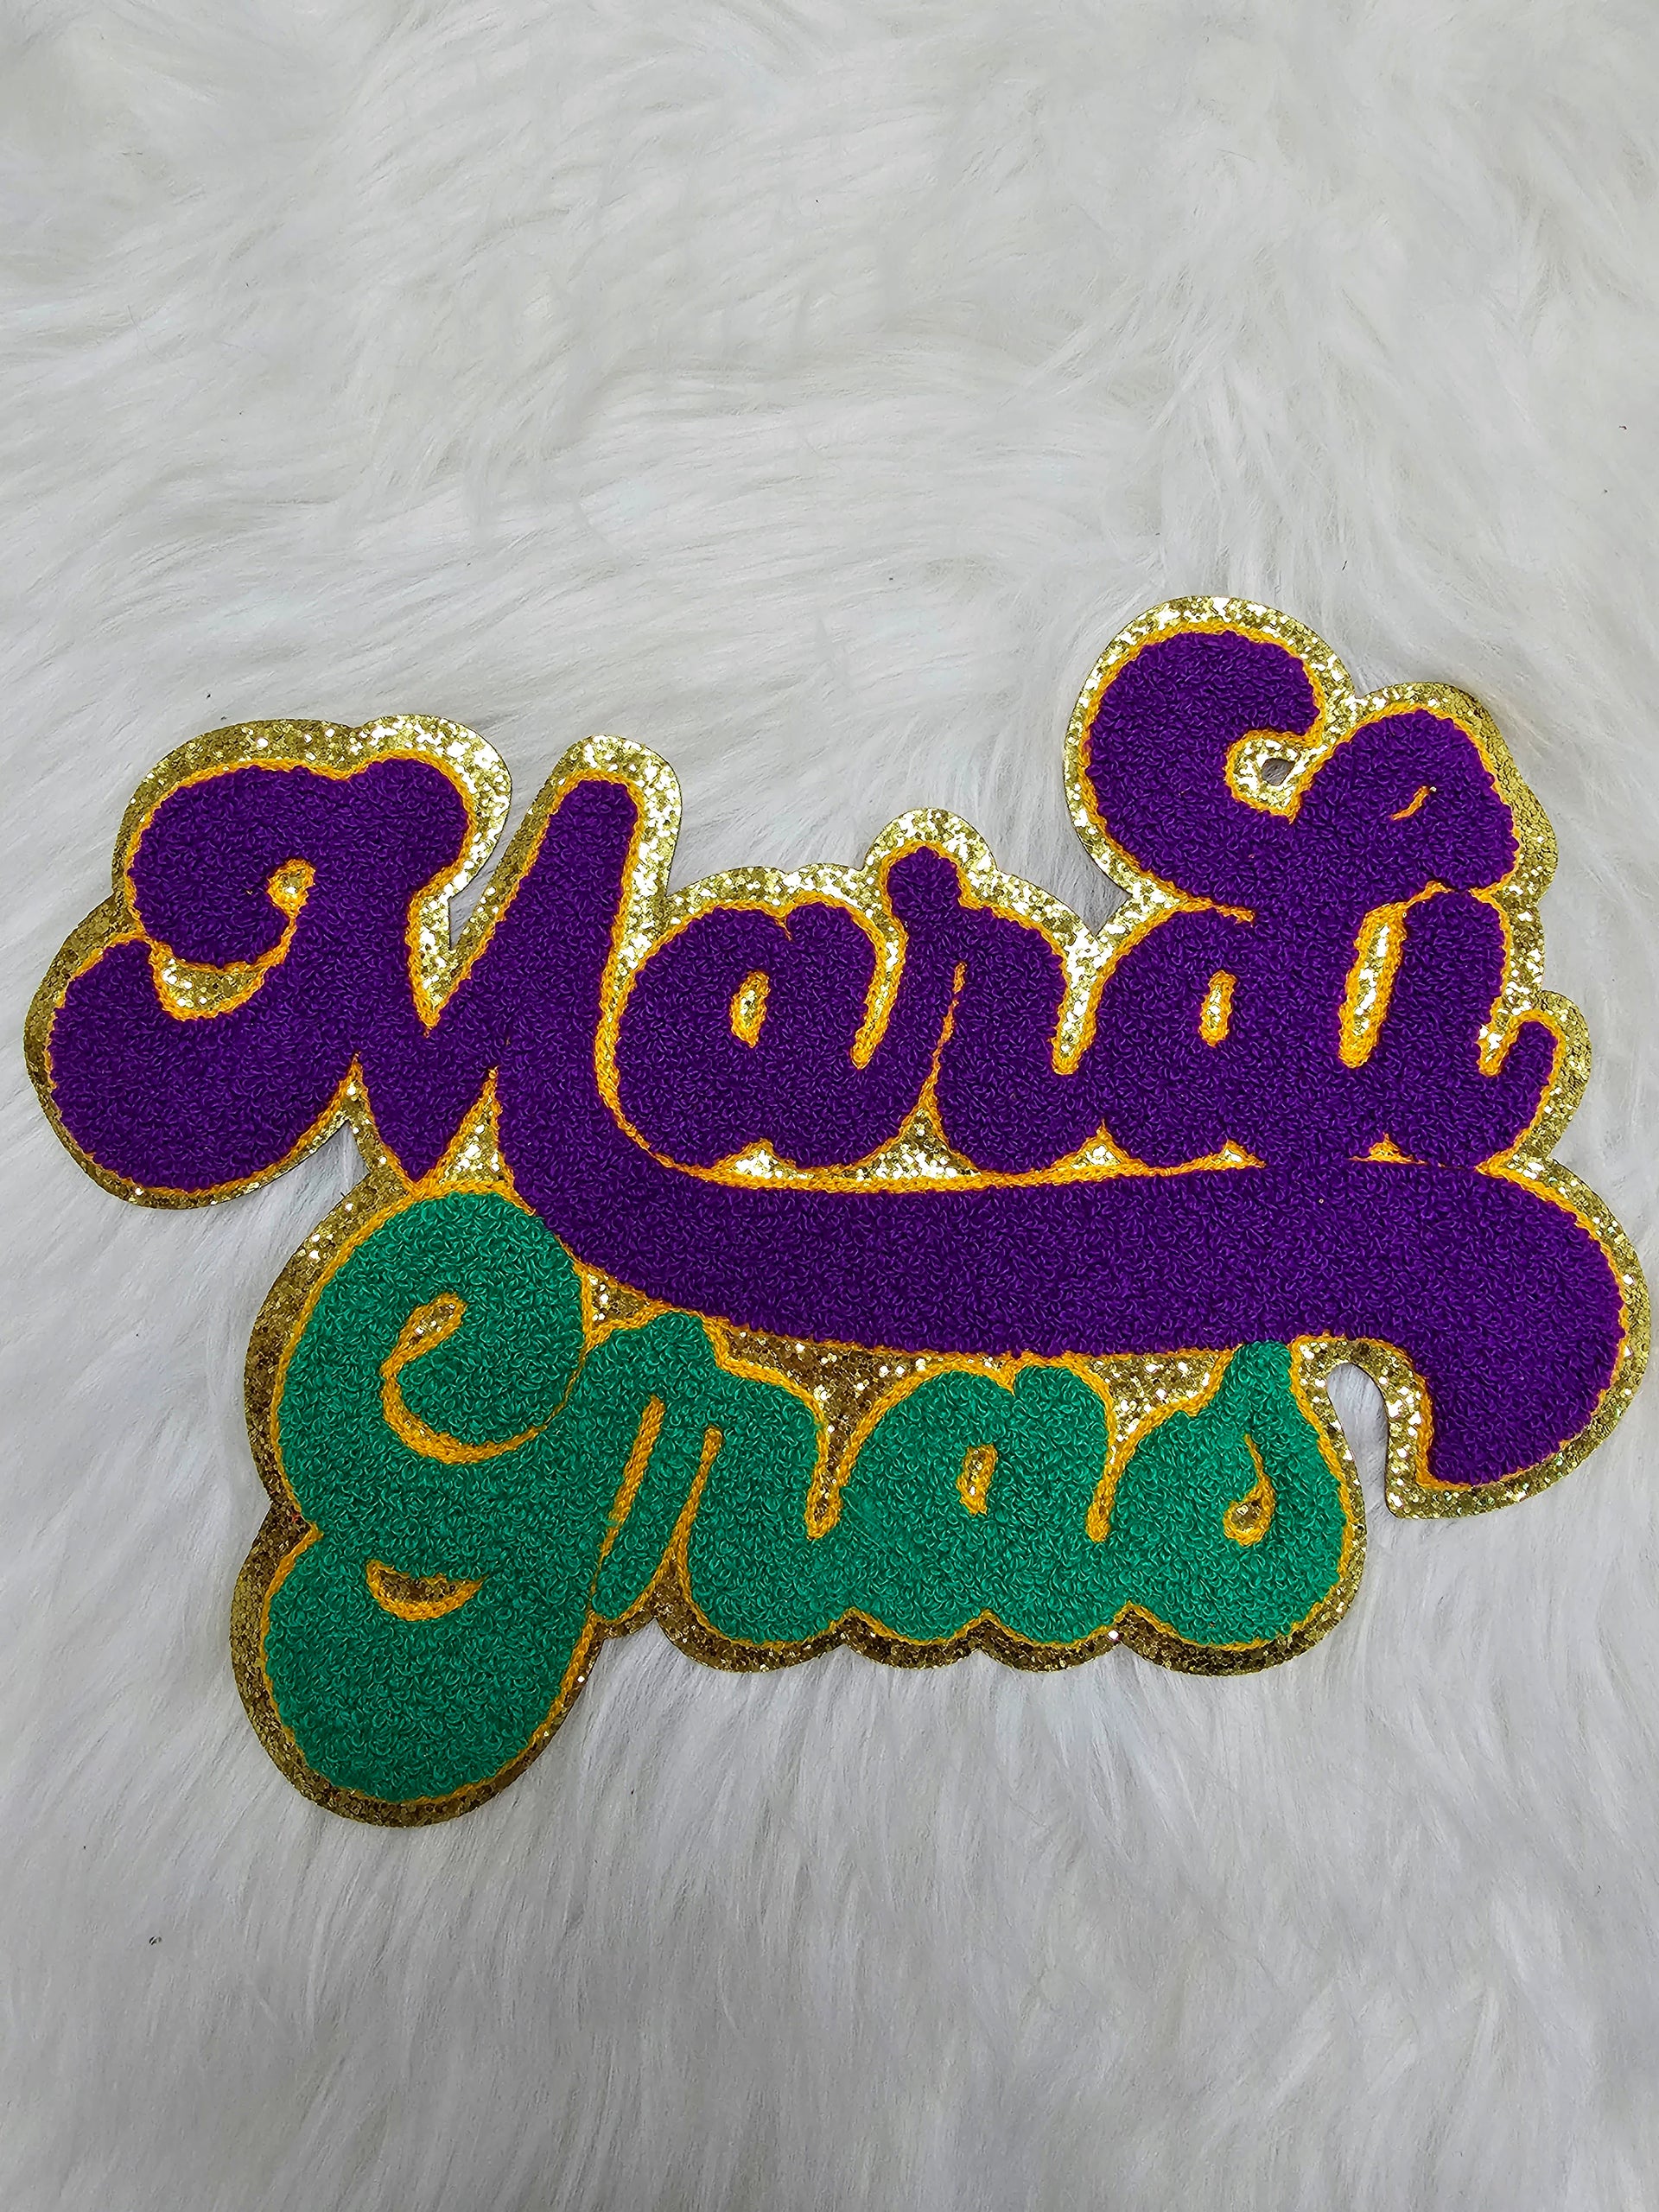 Mardi Gras Mask Embroidered Iron on Patch, Size: 3 Diameter